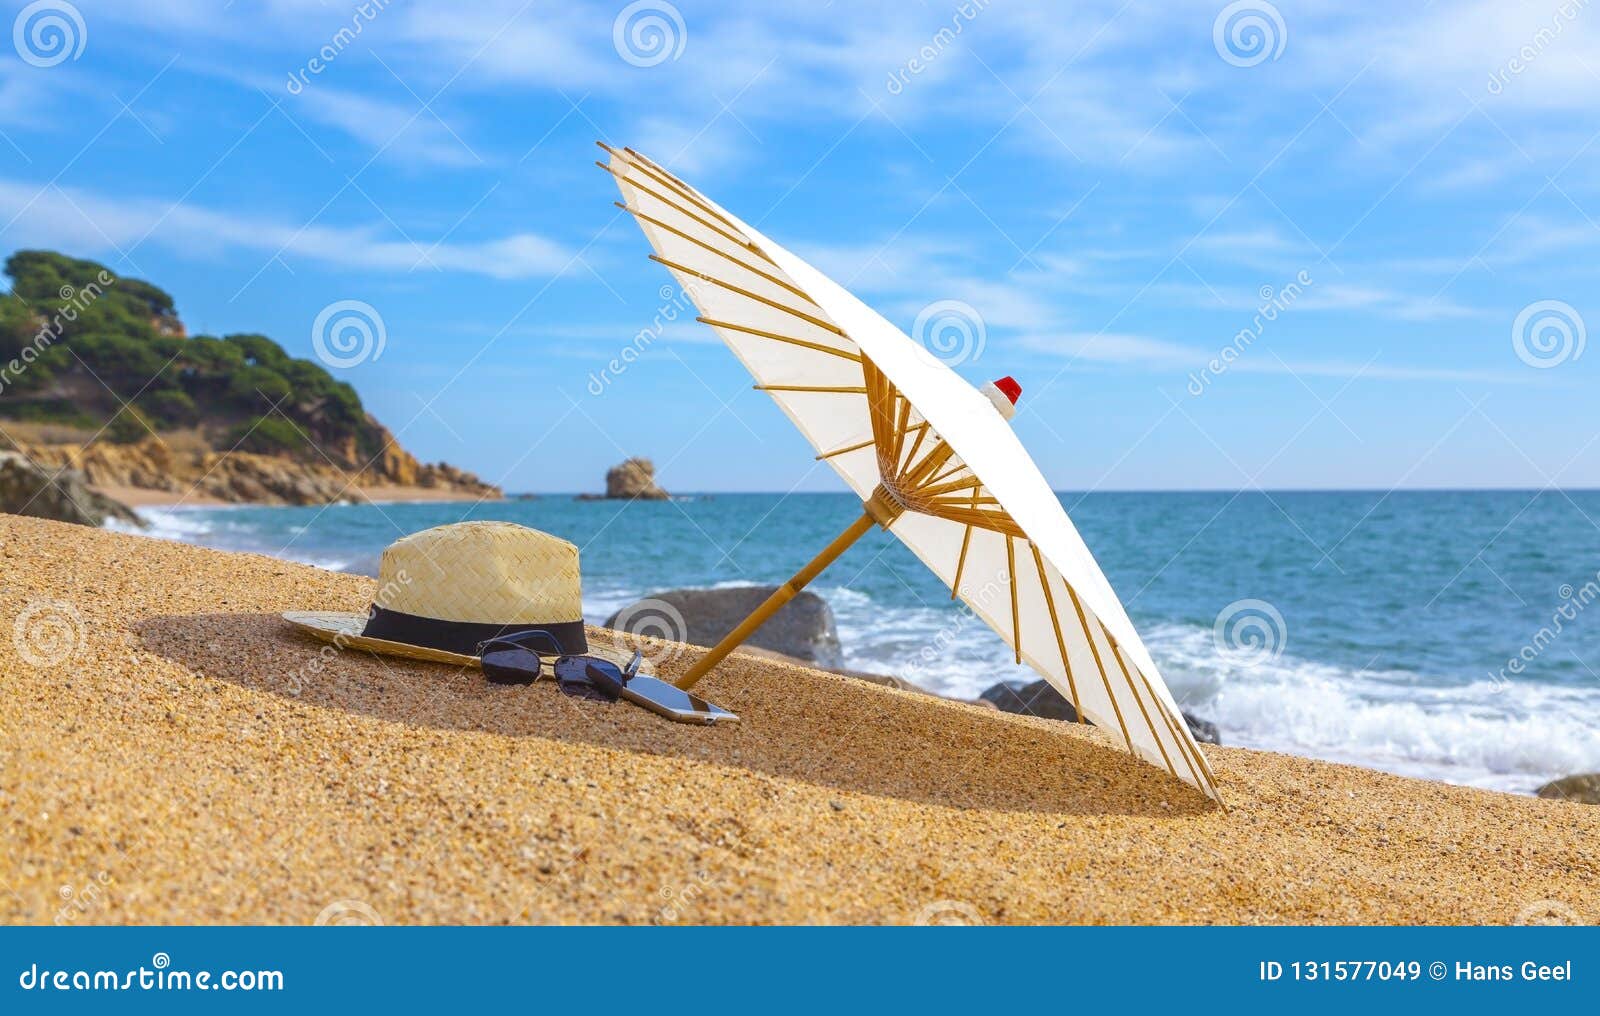 panama hat and beach umbrella on the sandy beach near the sea. summer holiday and vacation concept for tourism